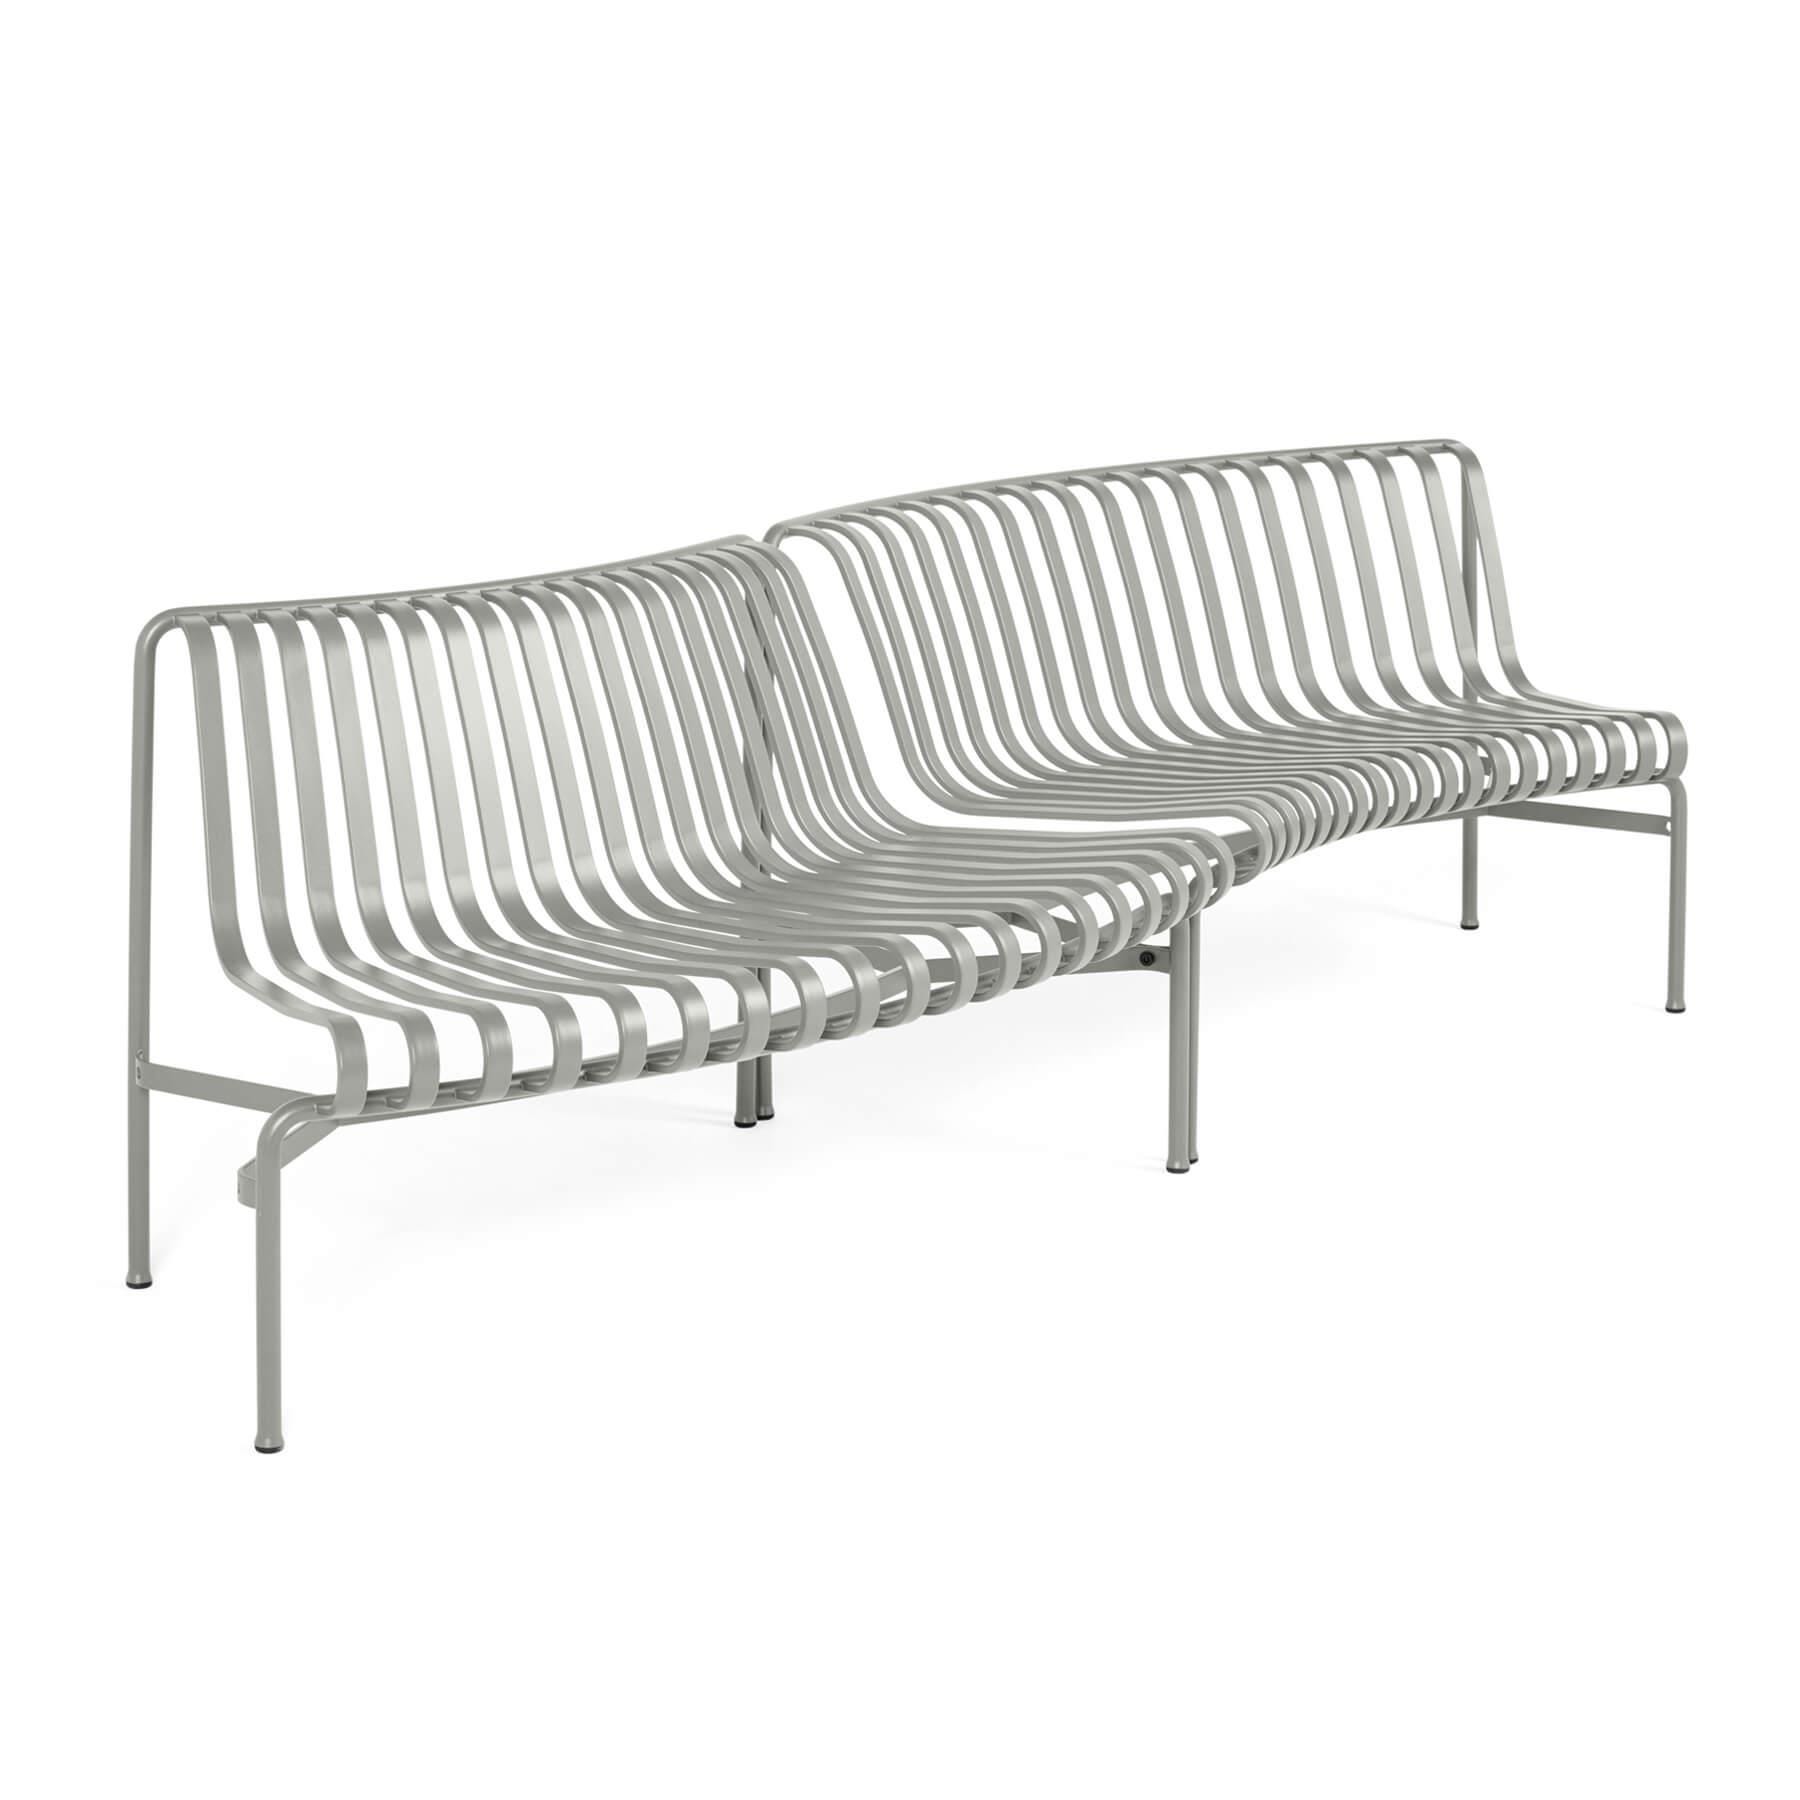 Hay Palissade Park Dining Bench In Out Sky Grey Designer Furniture From Holloways Of Ludlow